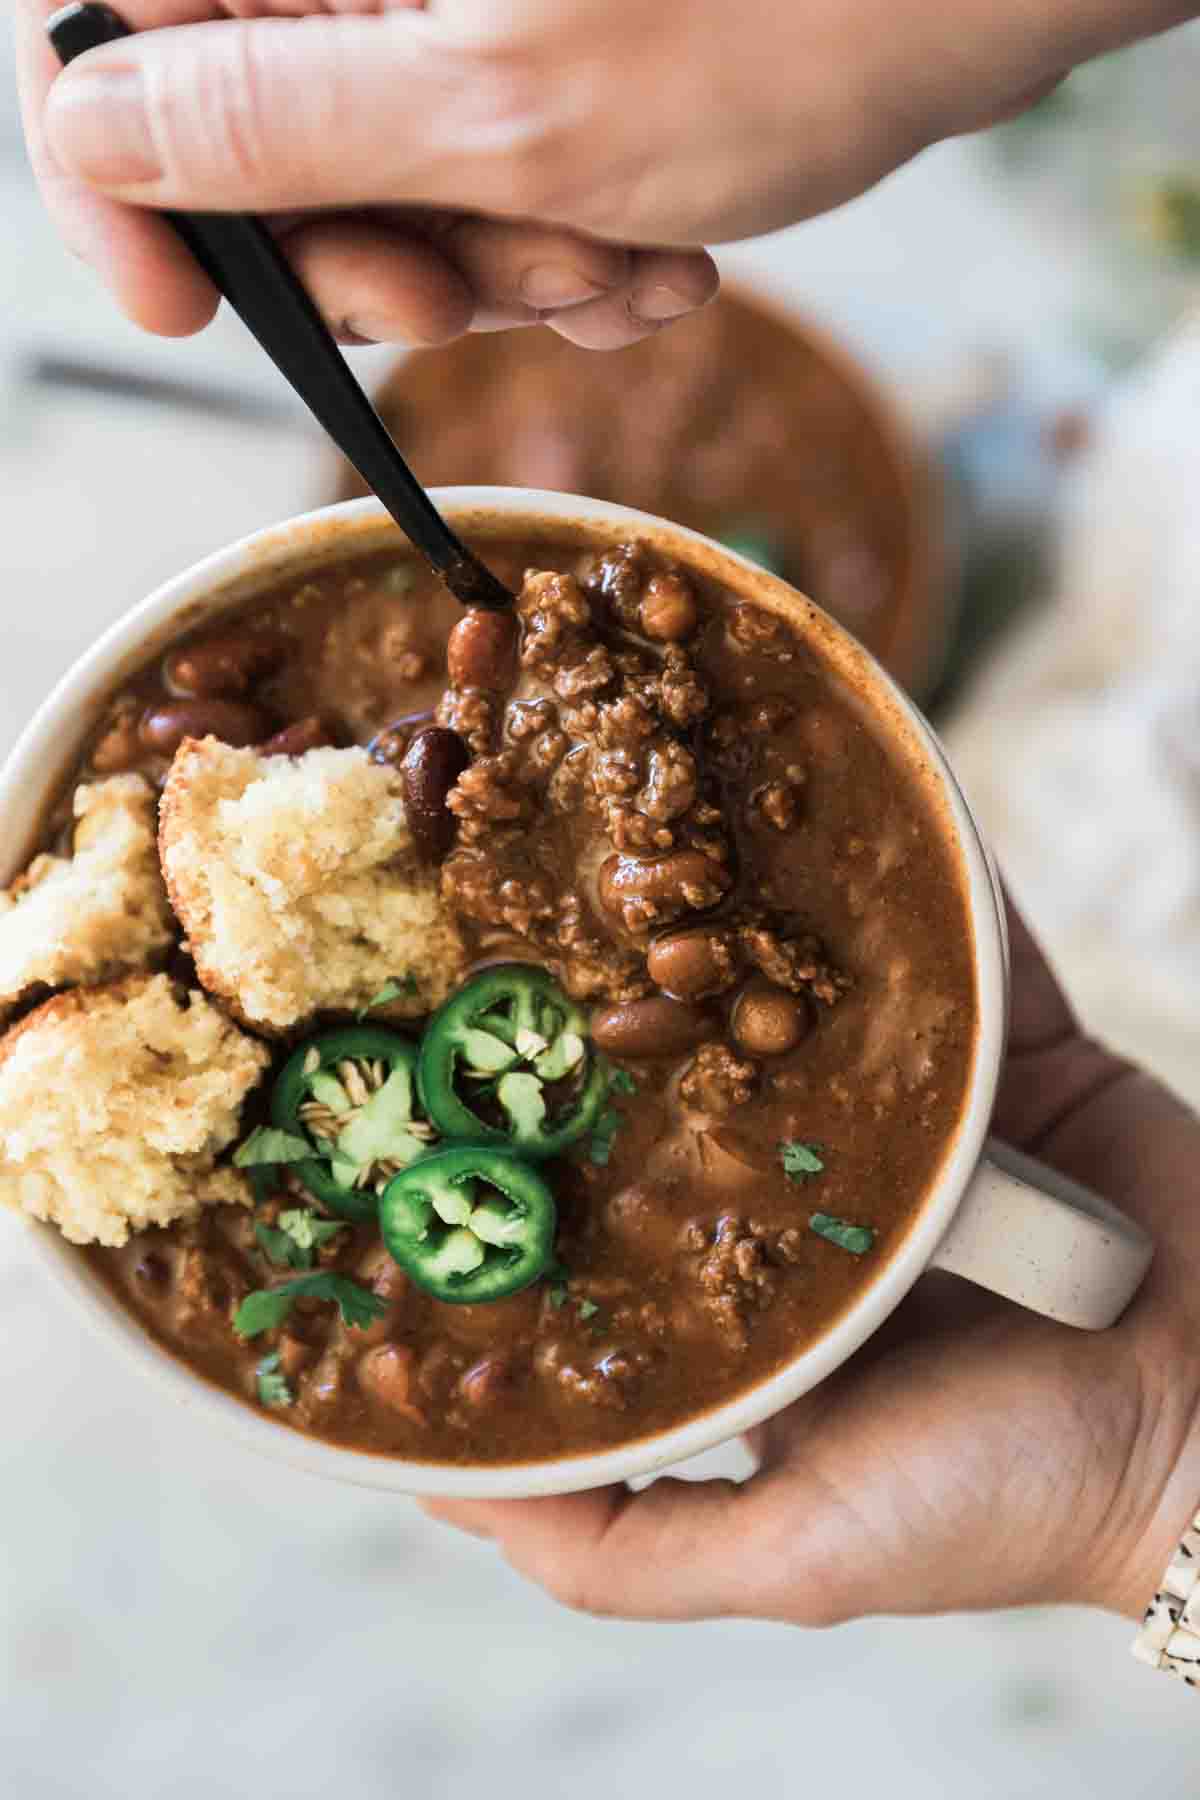 A bowl of chili being held with a spoon inserted. It is garnished with cornbread and jalapeños.